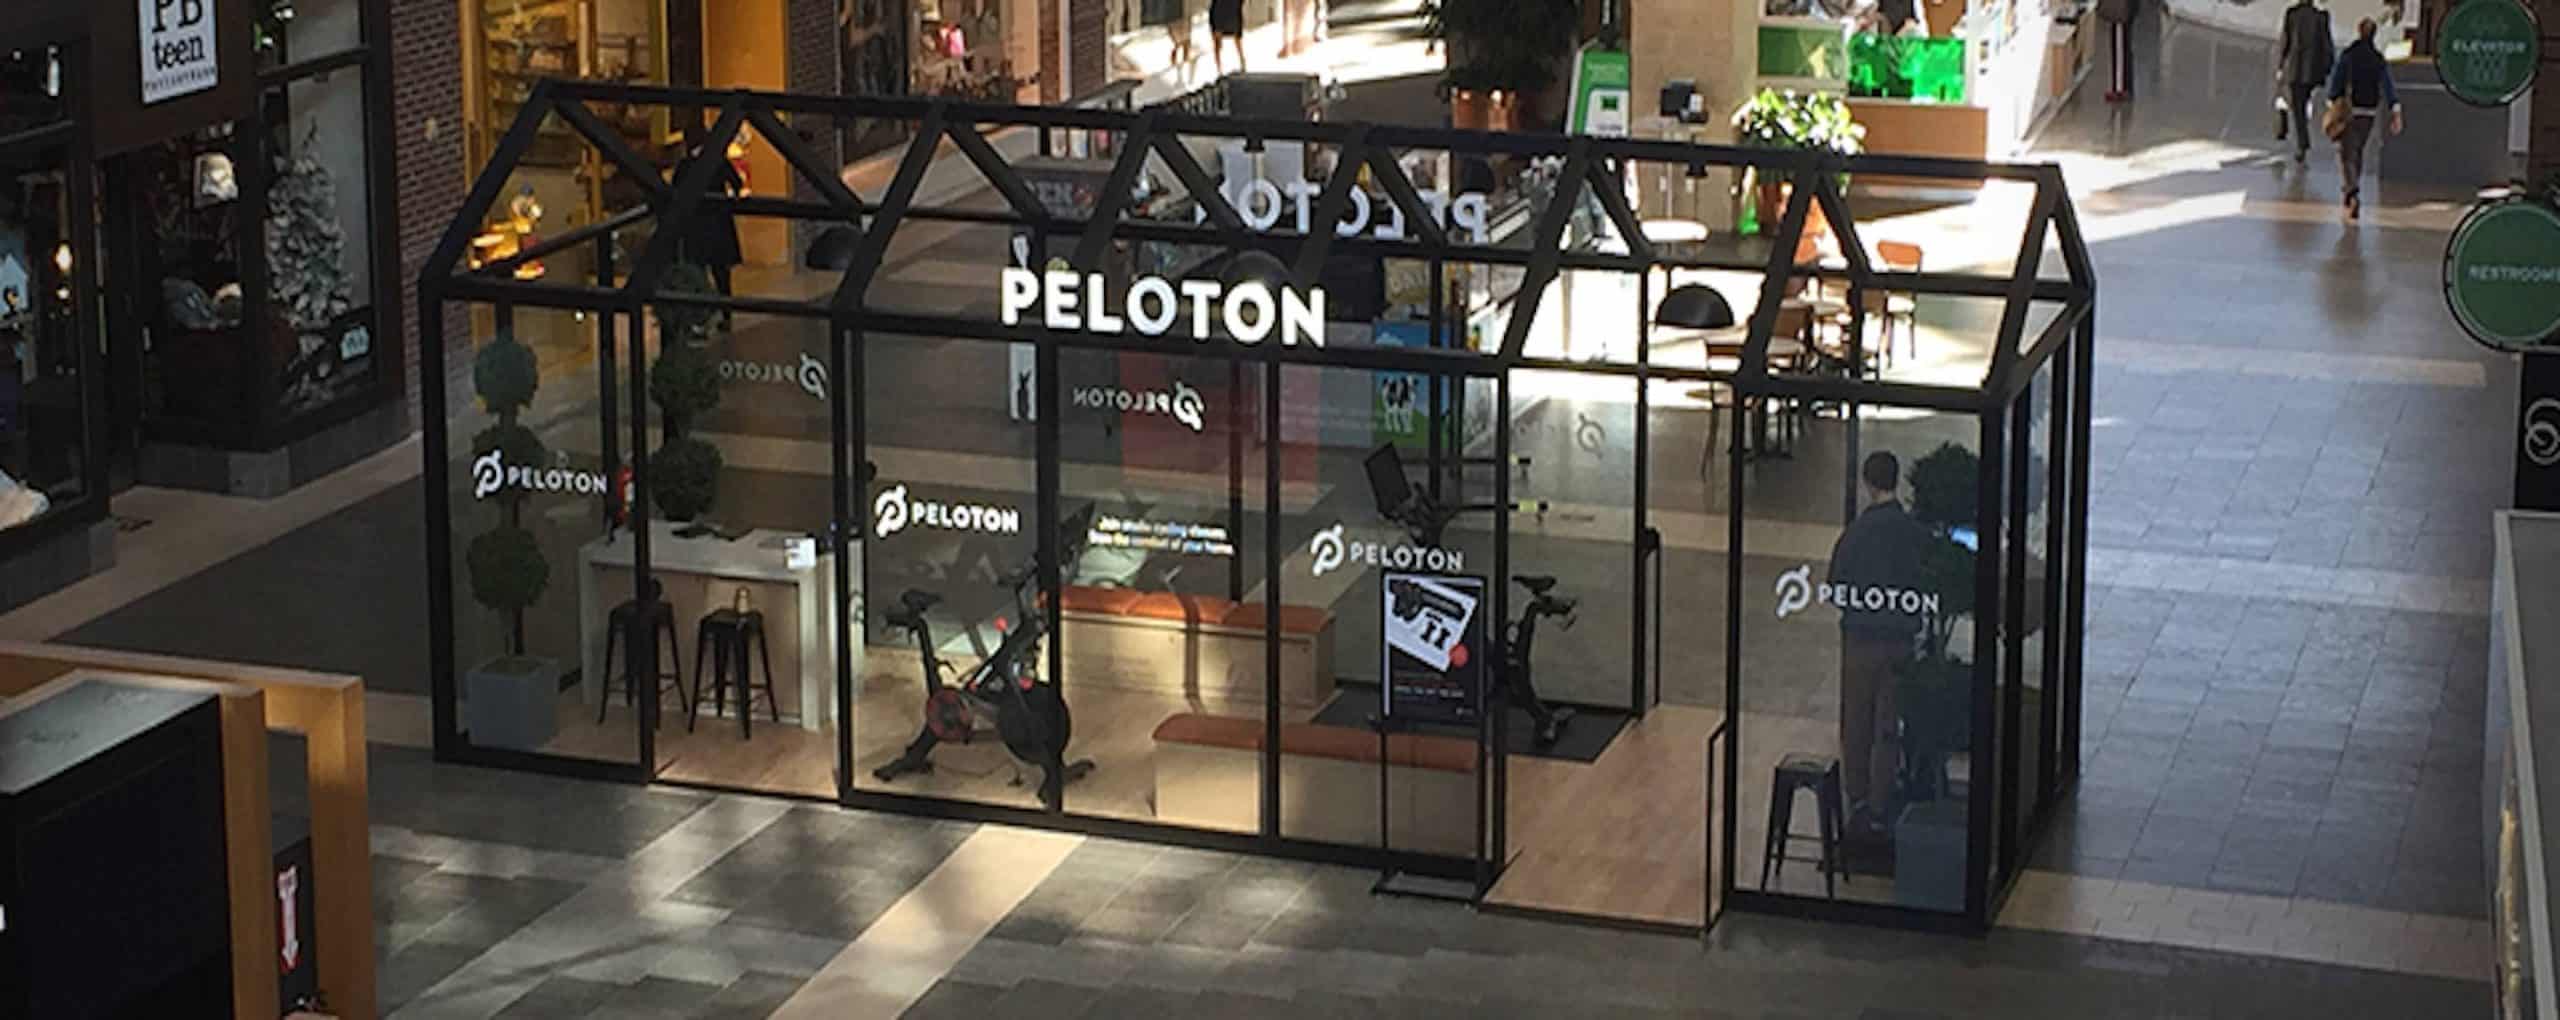 Peloton leverages an omnichannel retail marketing strategy through its brick-and-mortar showcase rooms